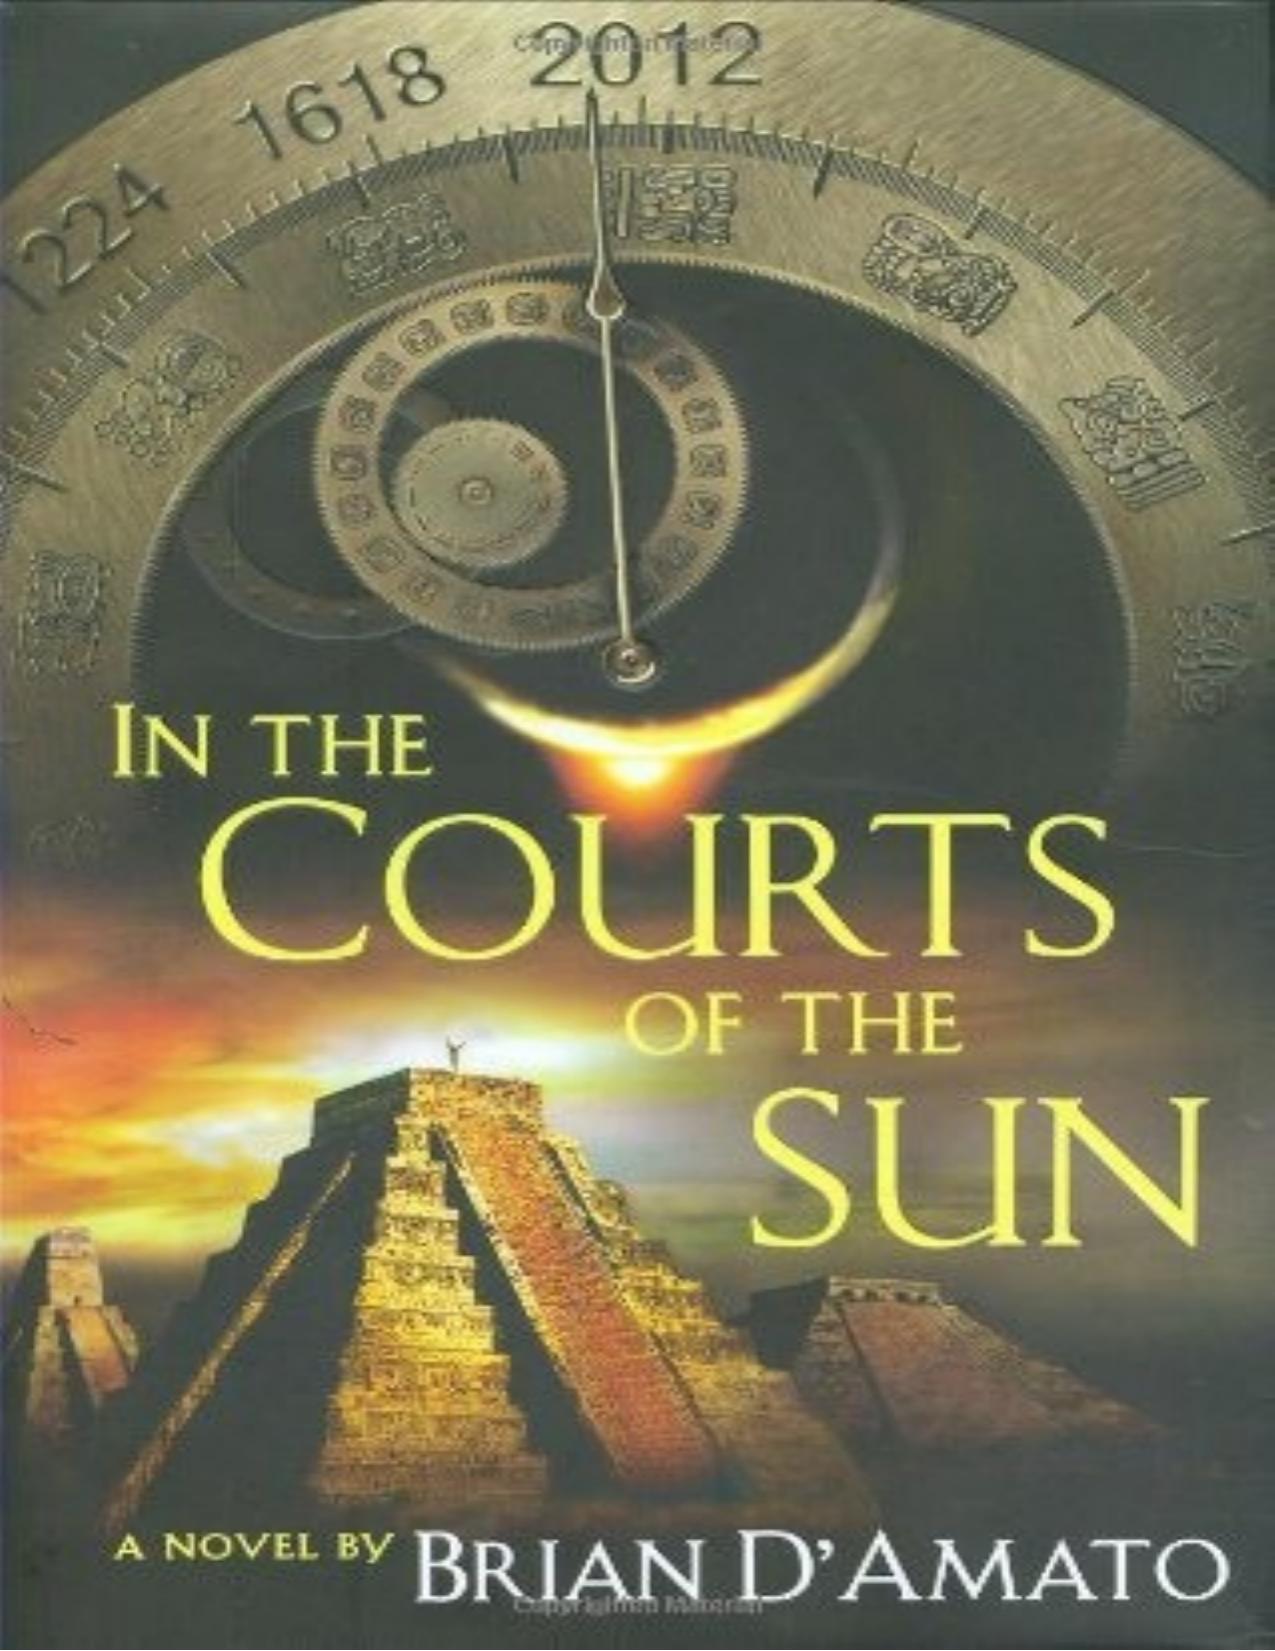 D'Amato, Brian - In the Courts of the Sun by D'Amato Brian